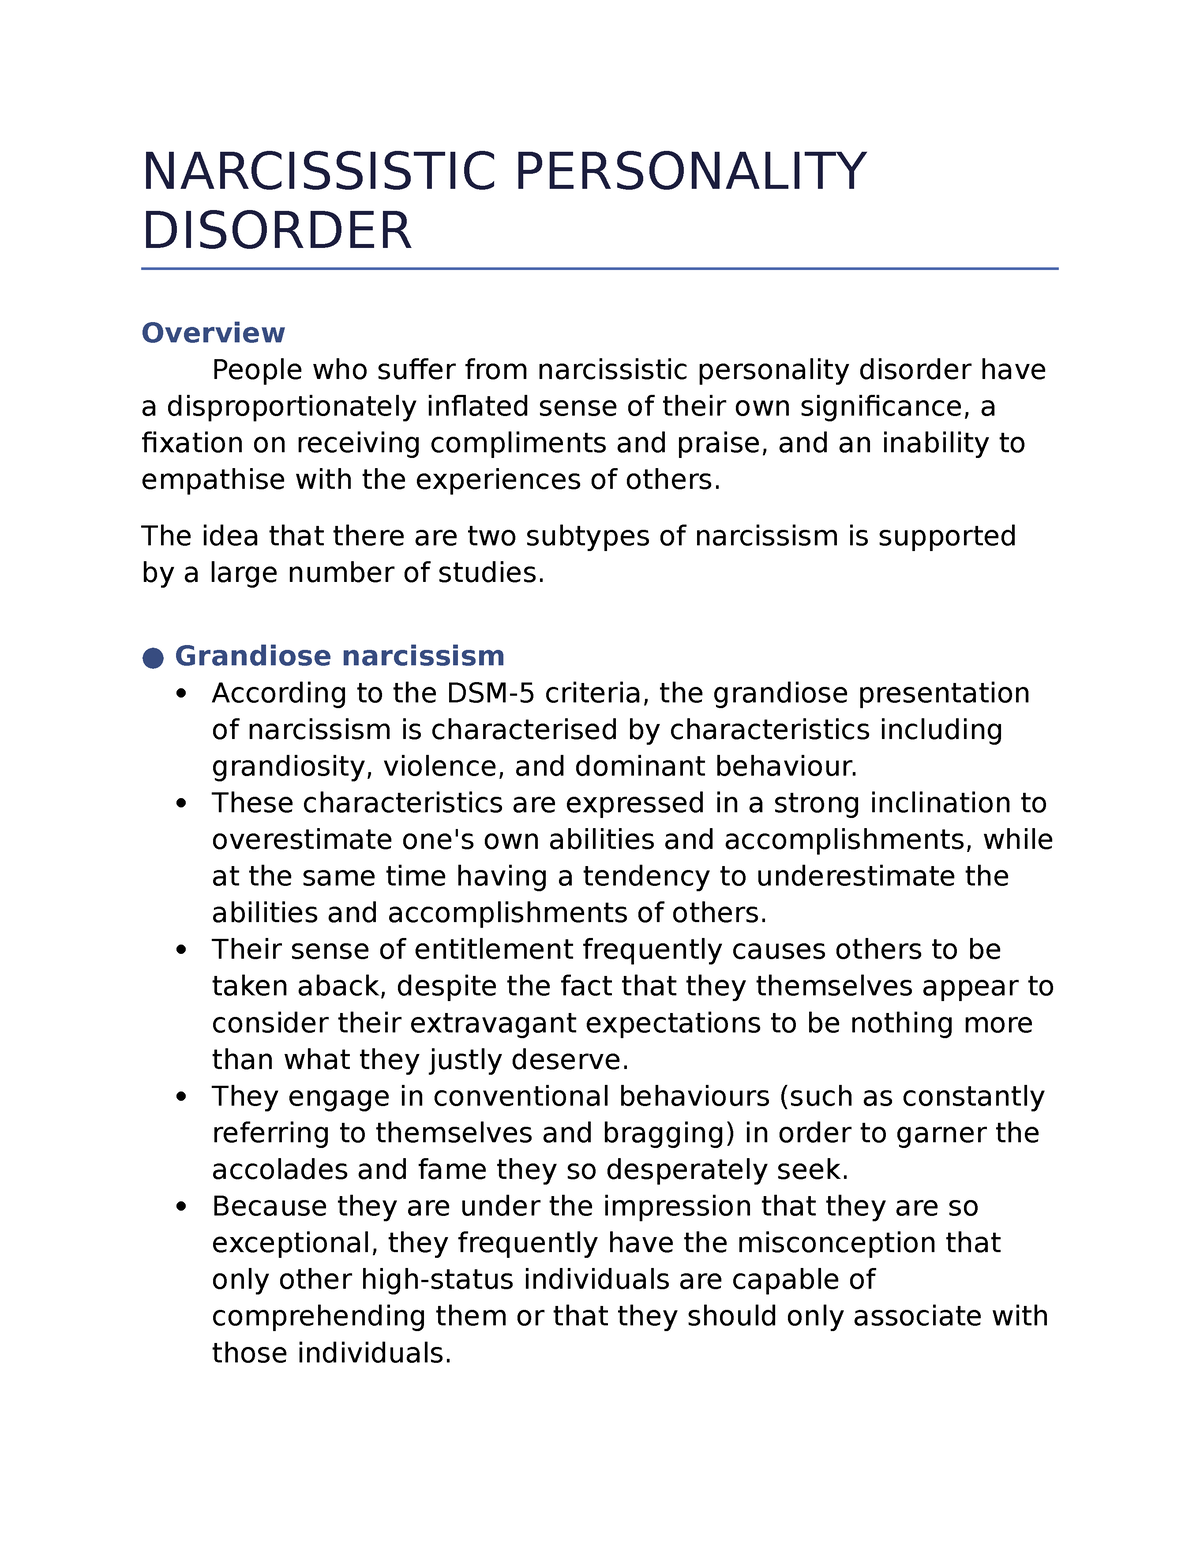 case study of narcissistic personality disorder